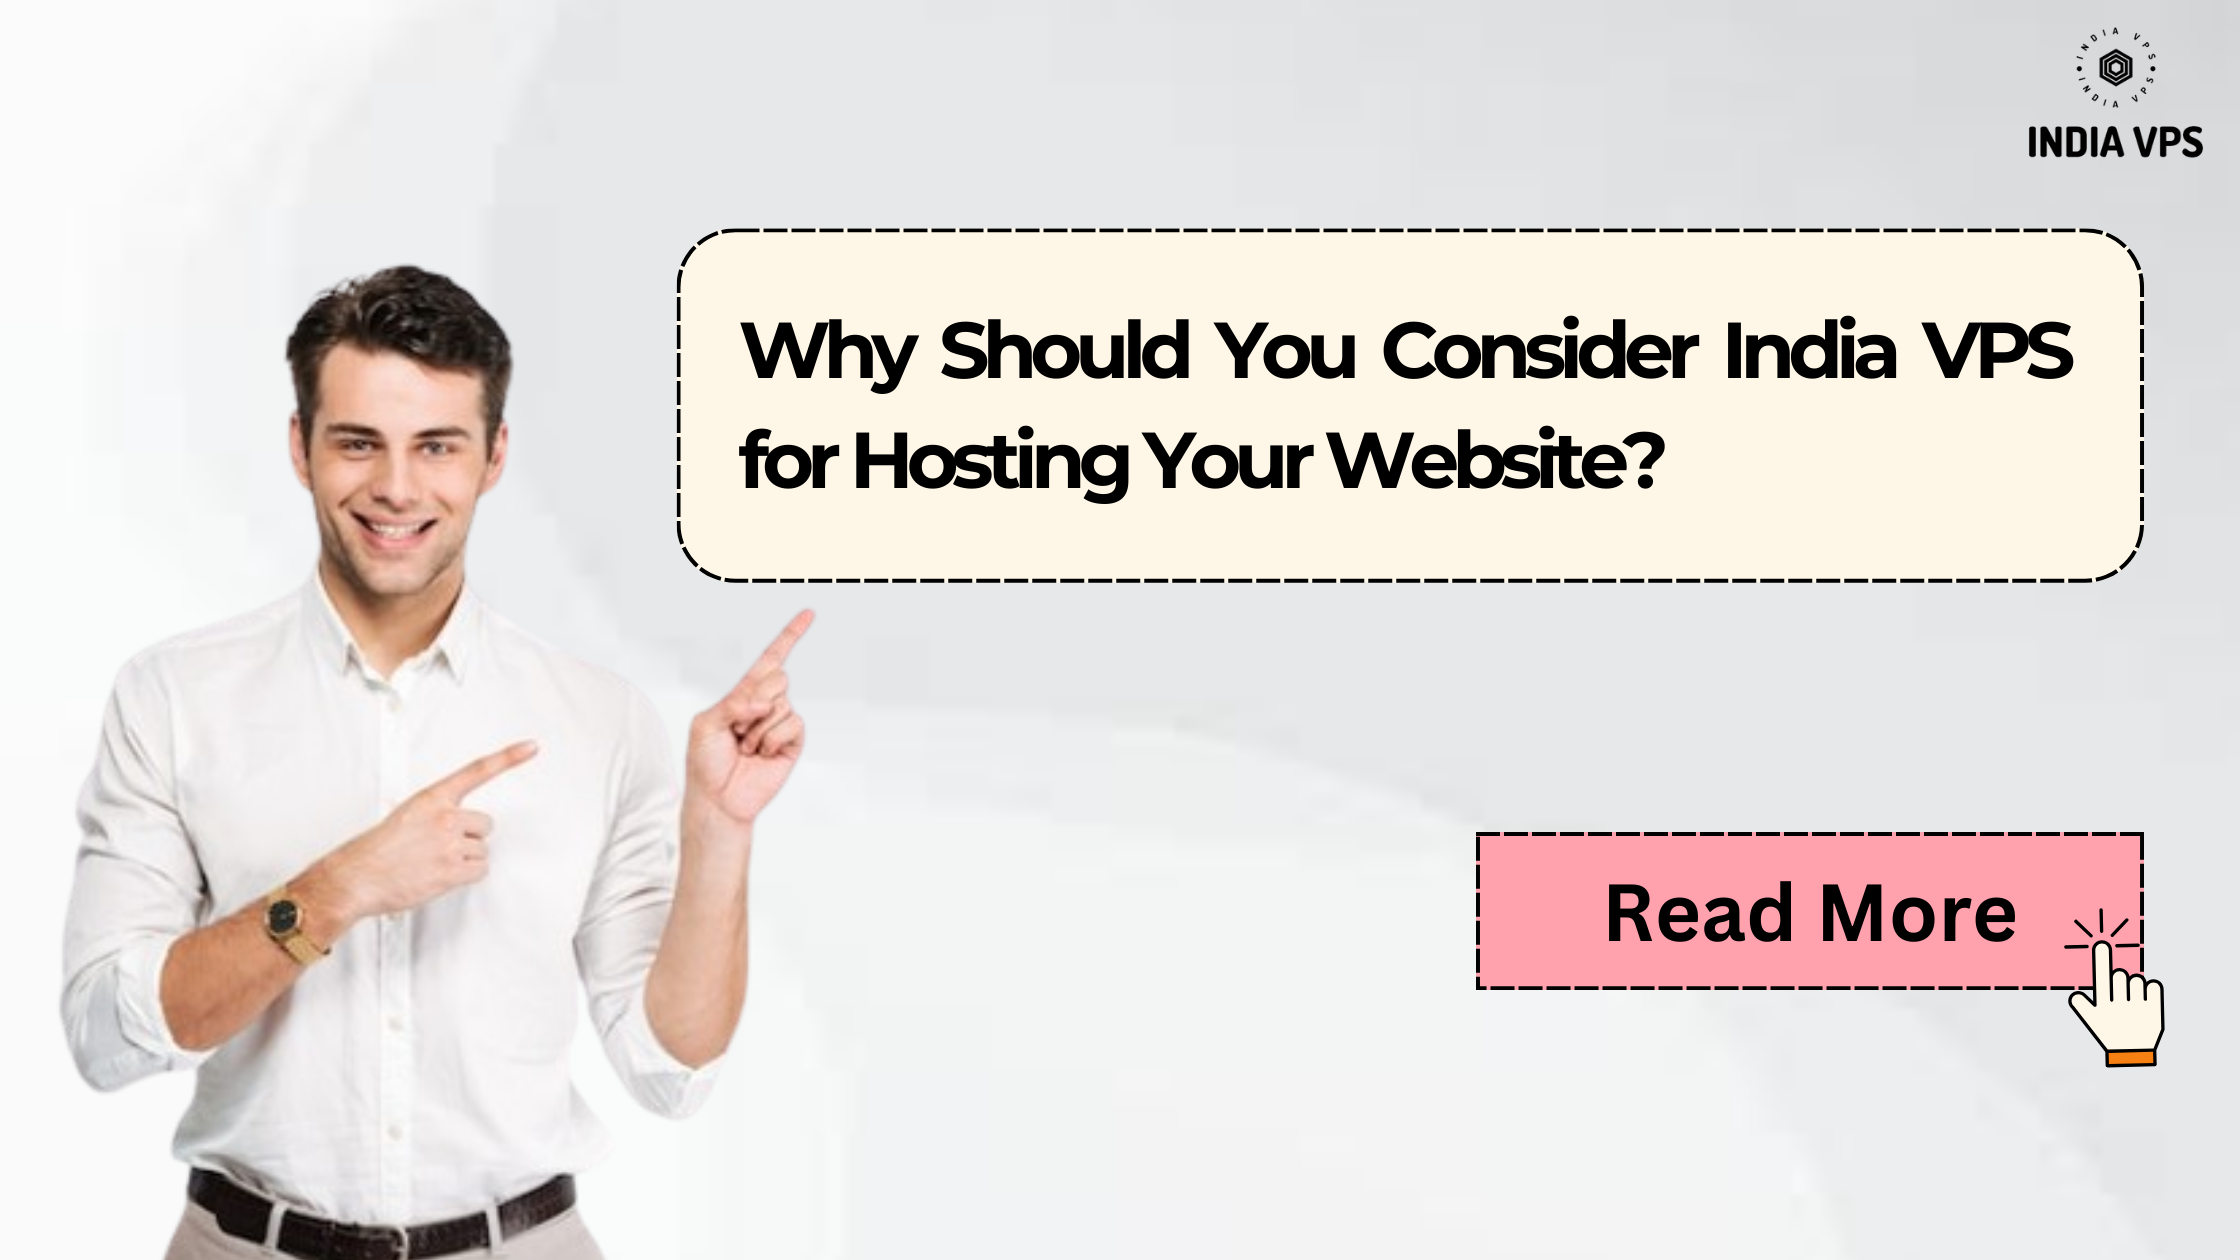 Why Should You Consider India VPS for Hosting Your Website?